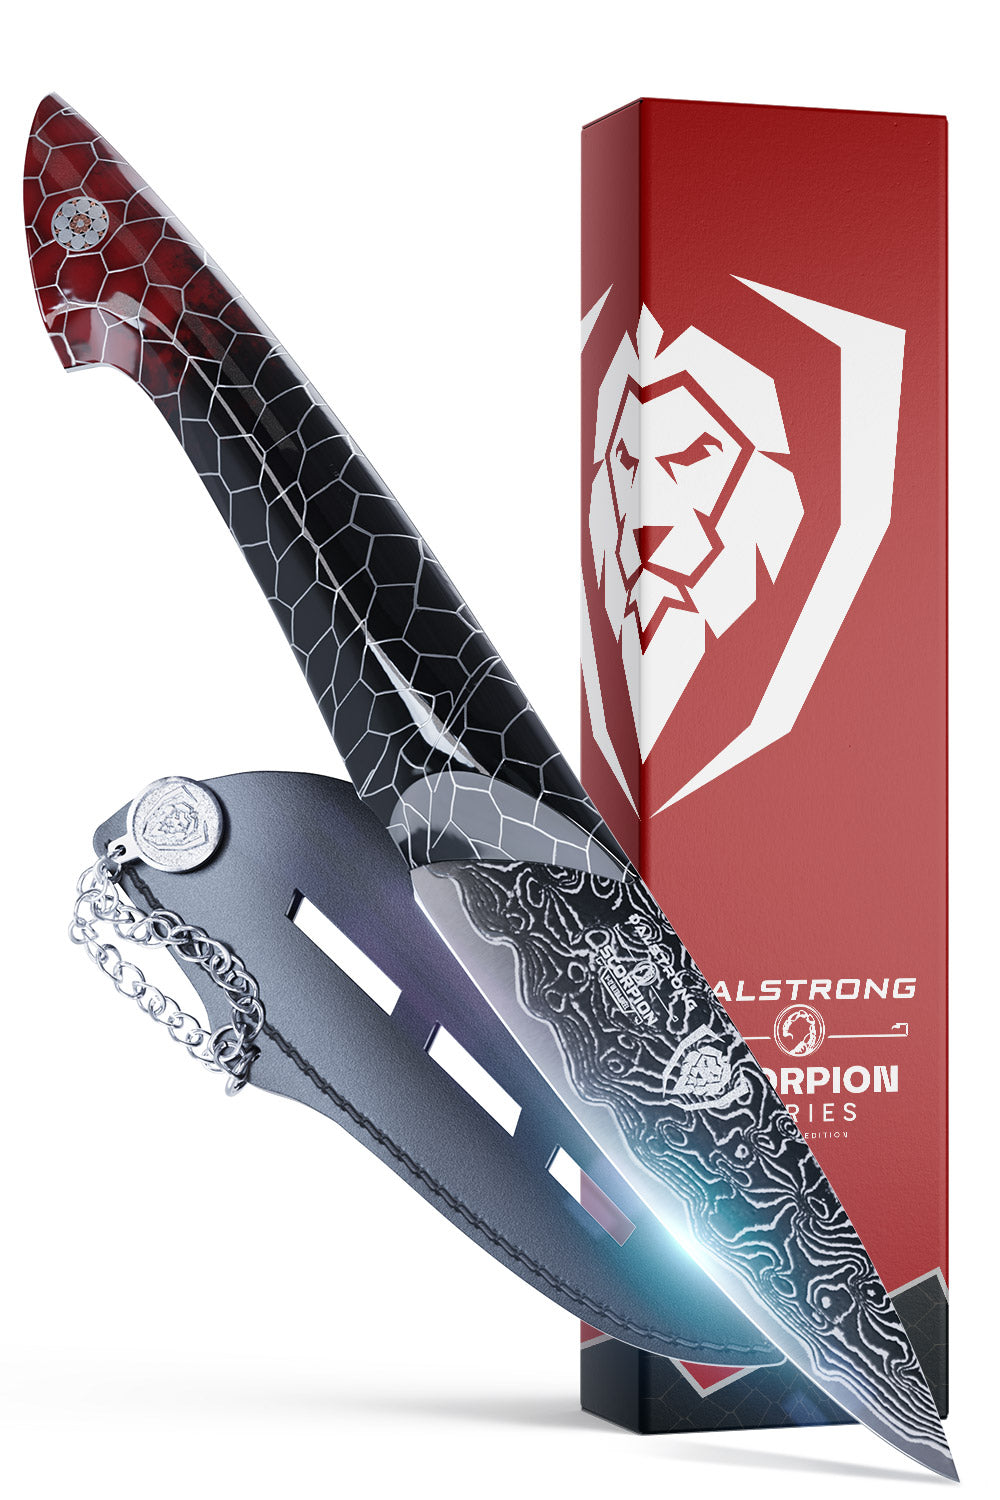 Dalstrong scorpion series 4 inch paring knife with red handle in front of it's premium packaging.